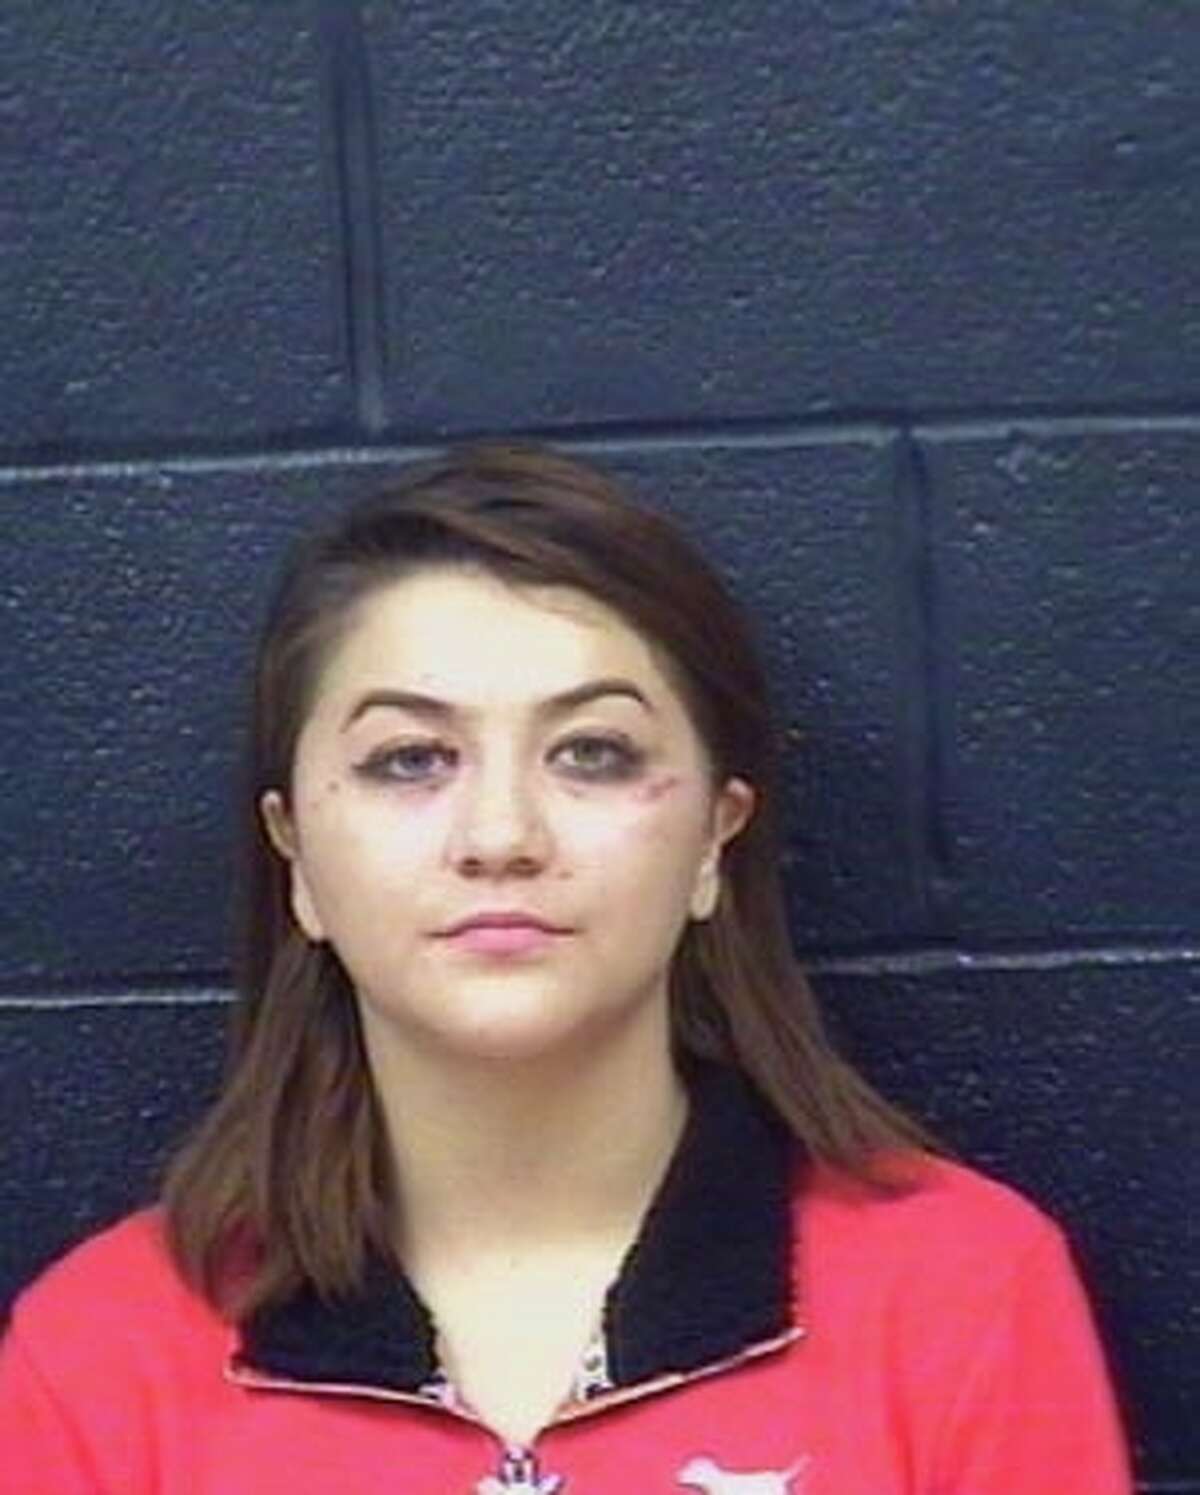 Esthefany Arias, 19, was cited for disorderly conduct (fighting with another.)